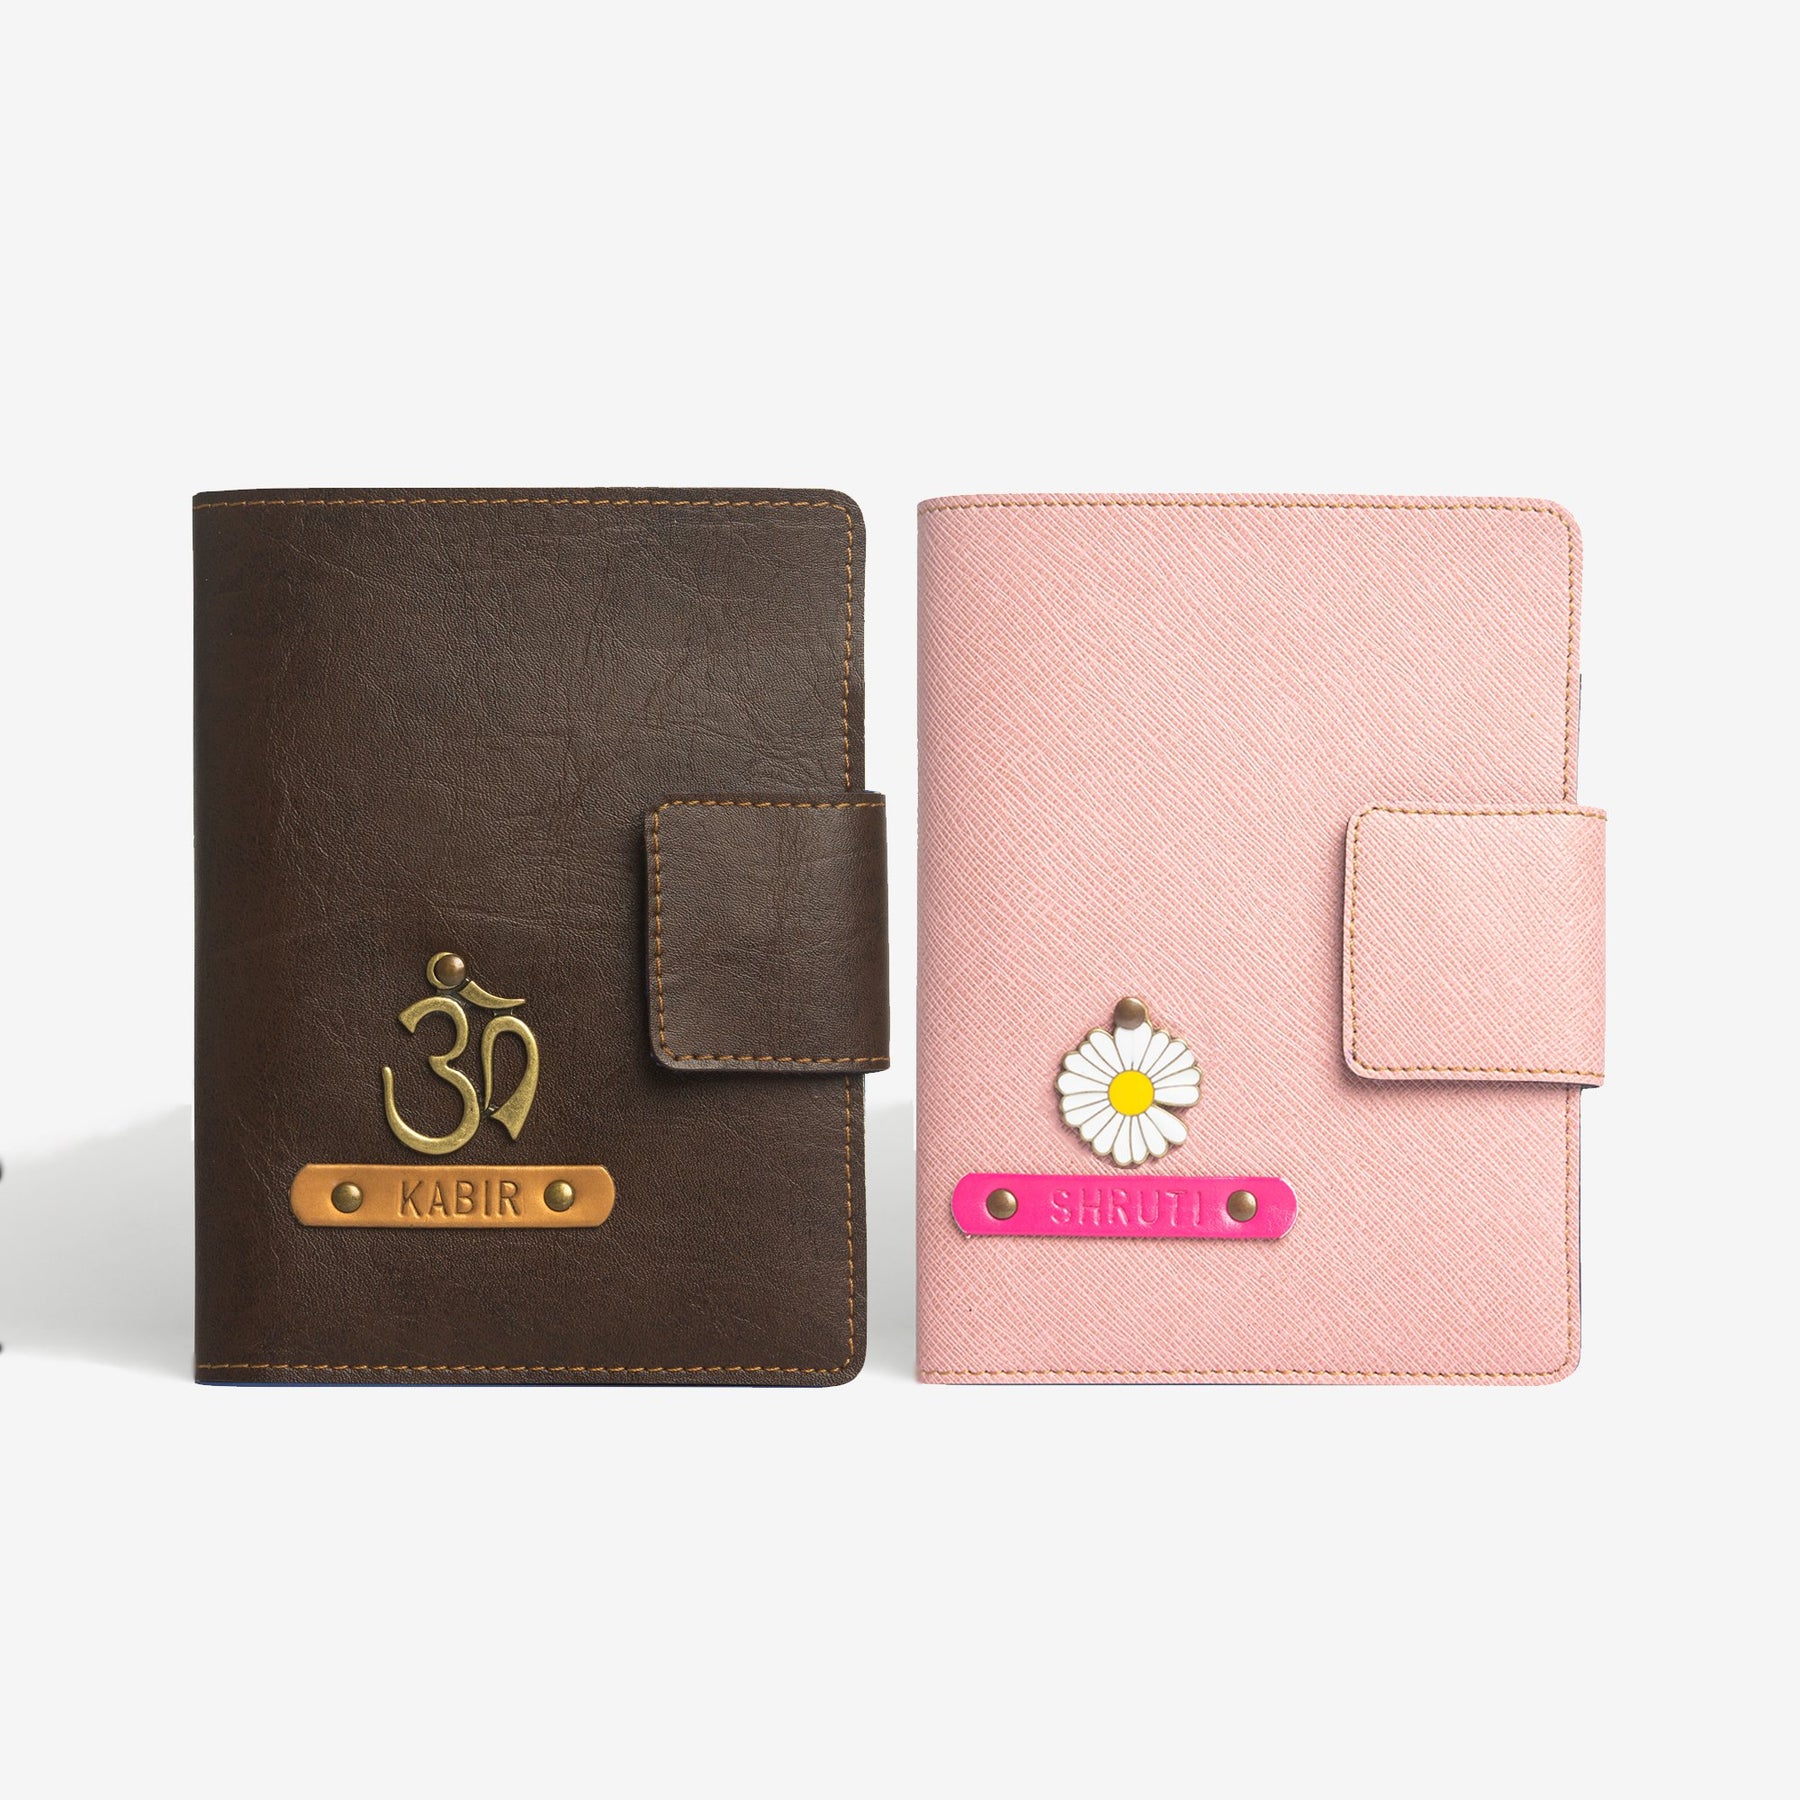 The Messy Corner Mini Travel Wallet Couple Passport cover with button - Set of 2